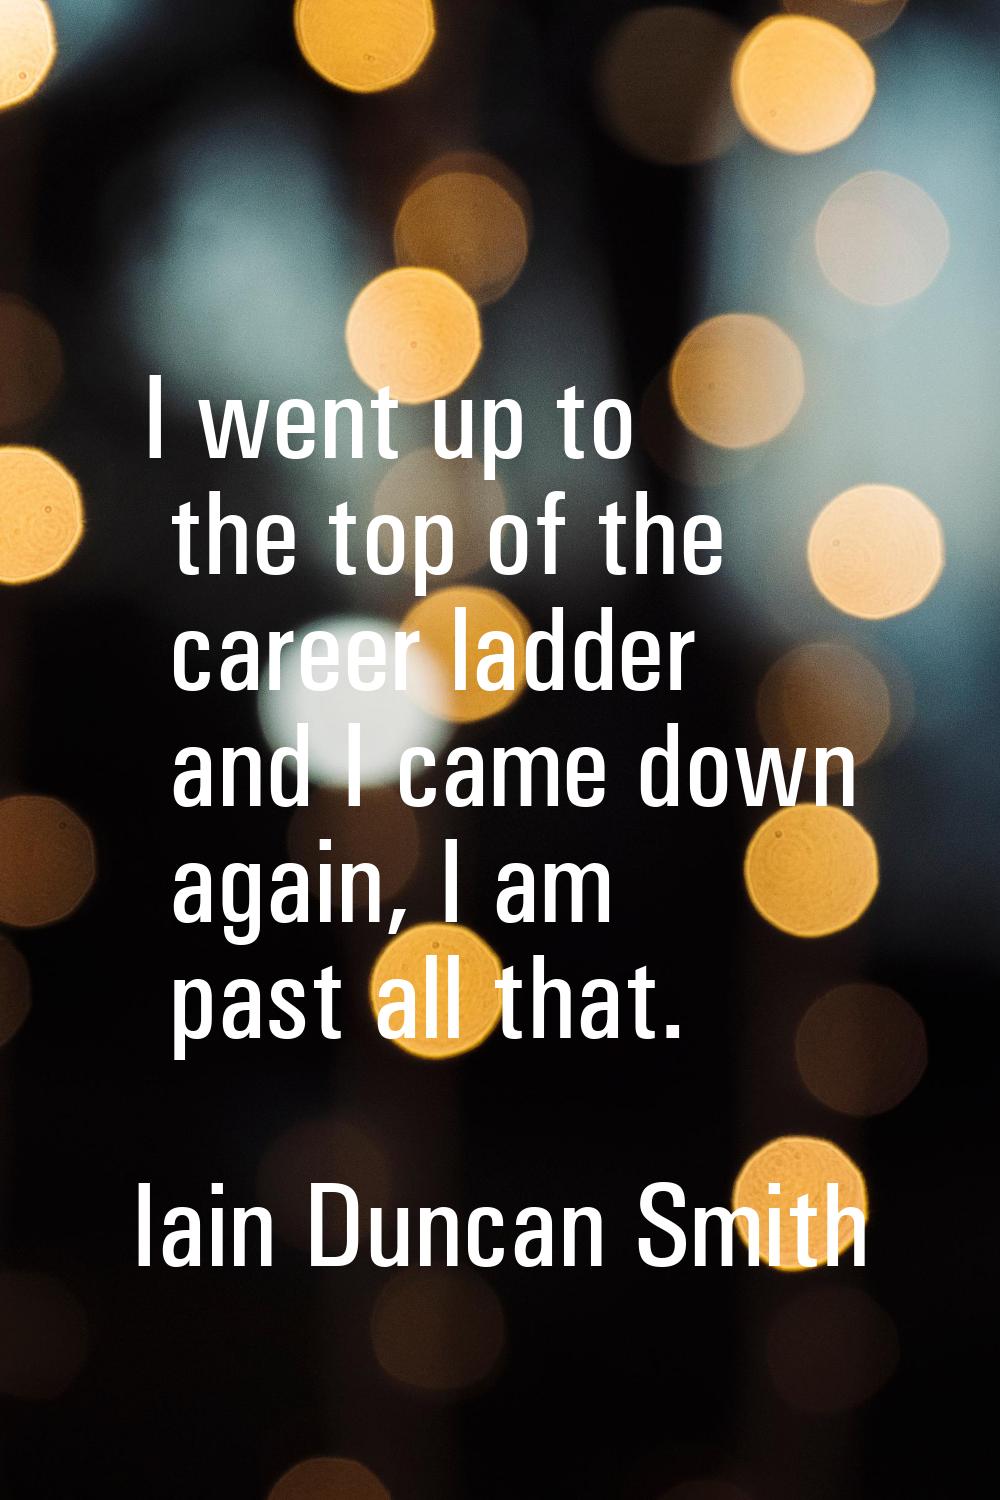 I went up to the top of the career ladder and I came down again, I am past all that.